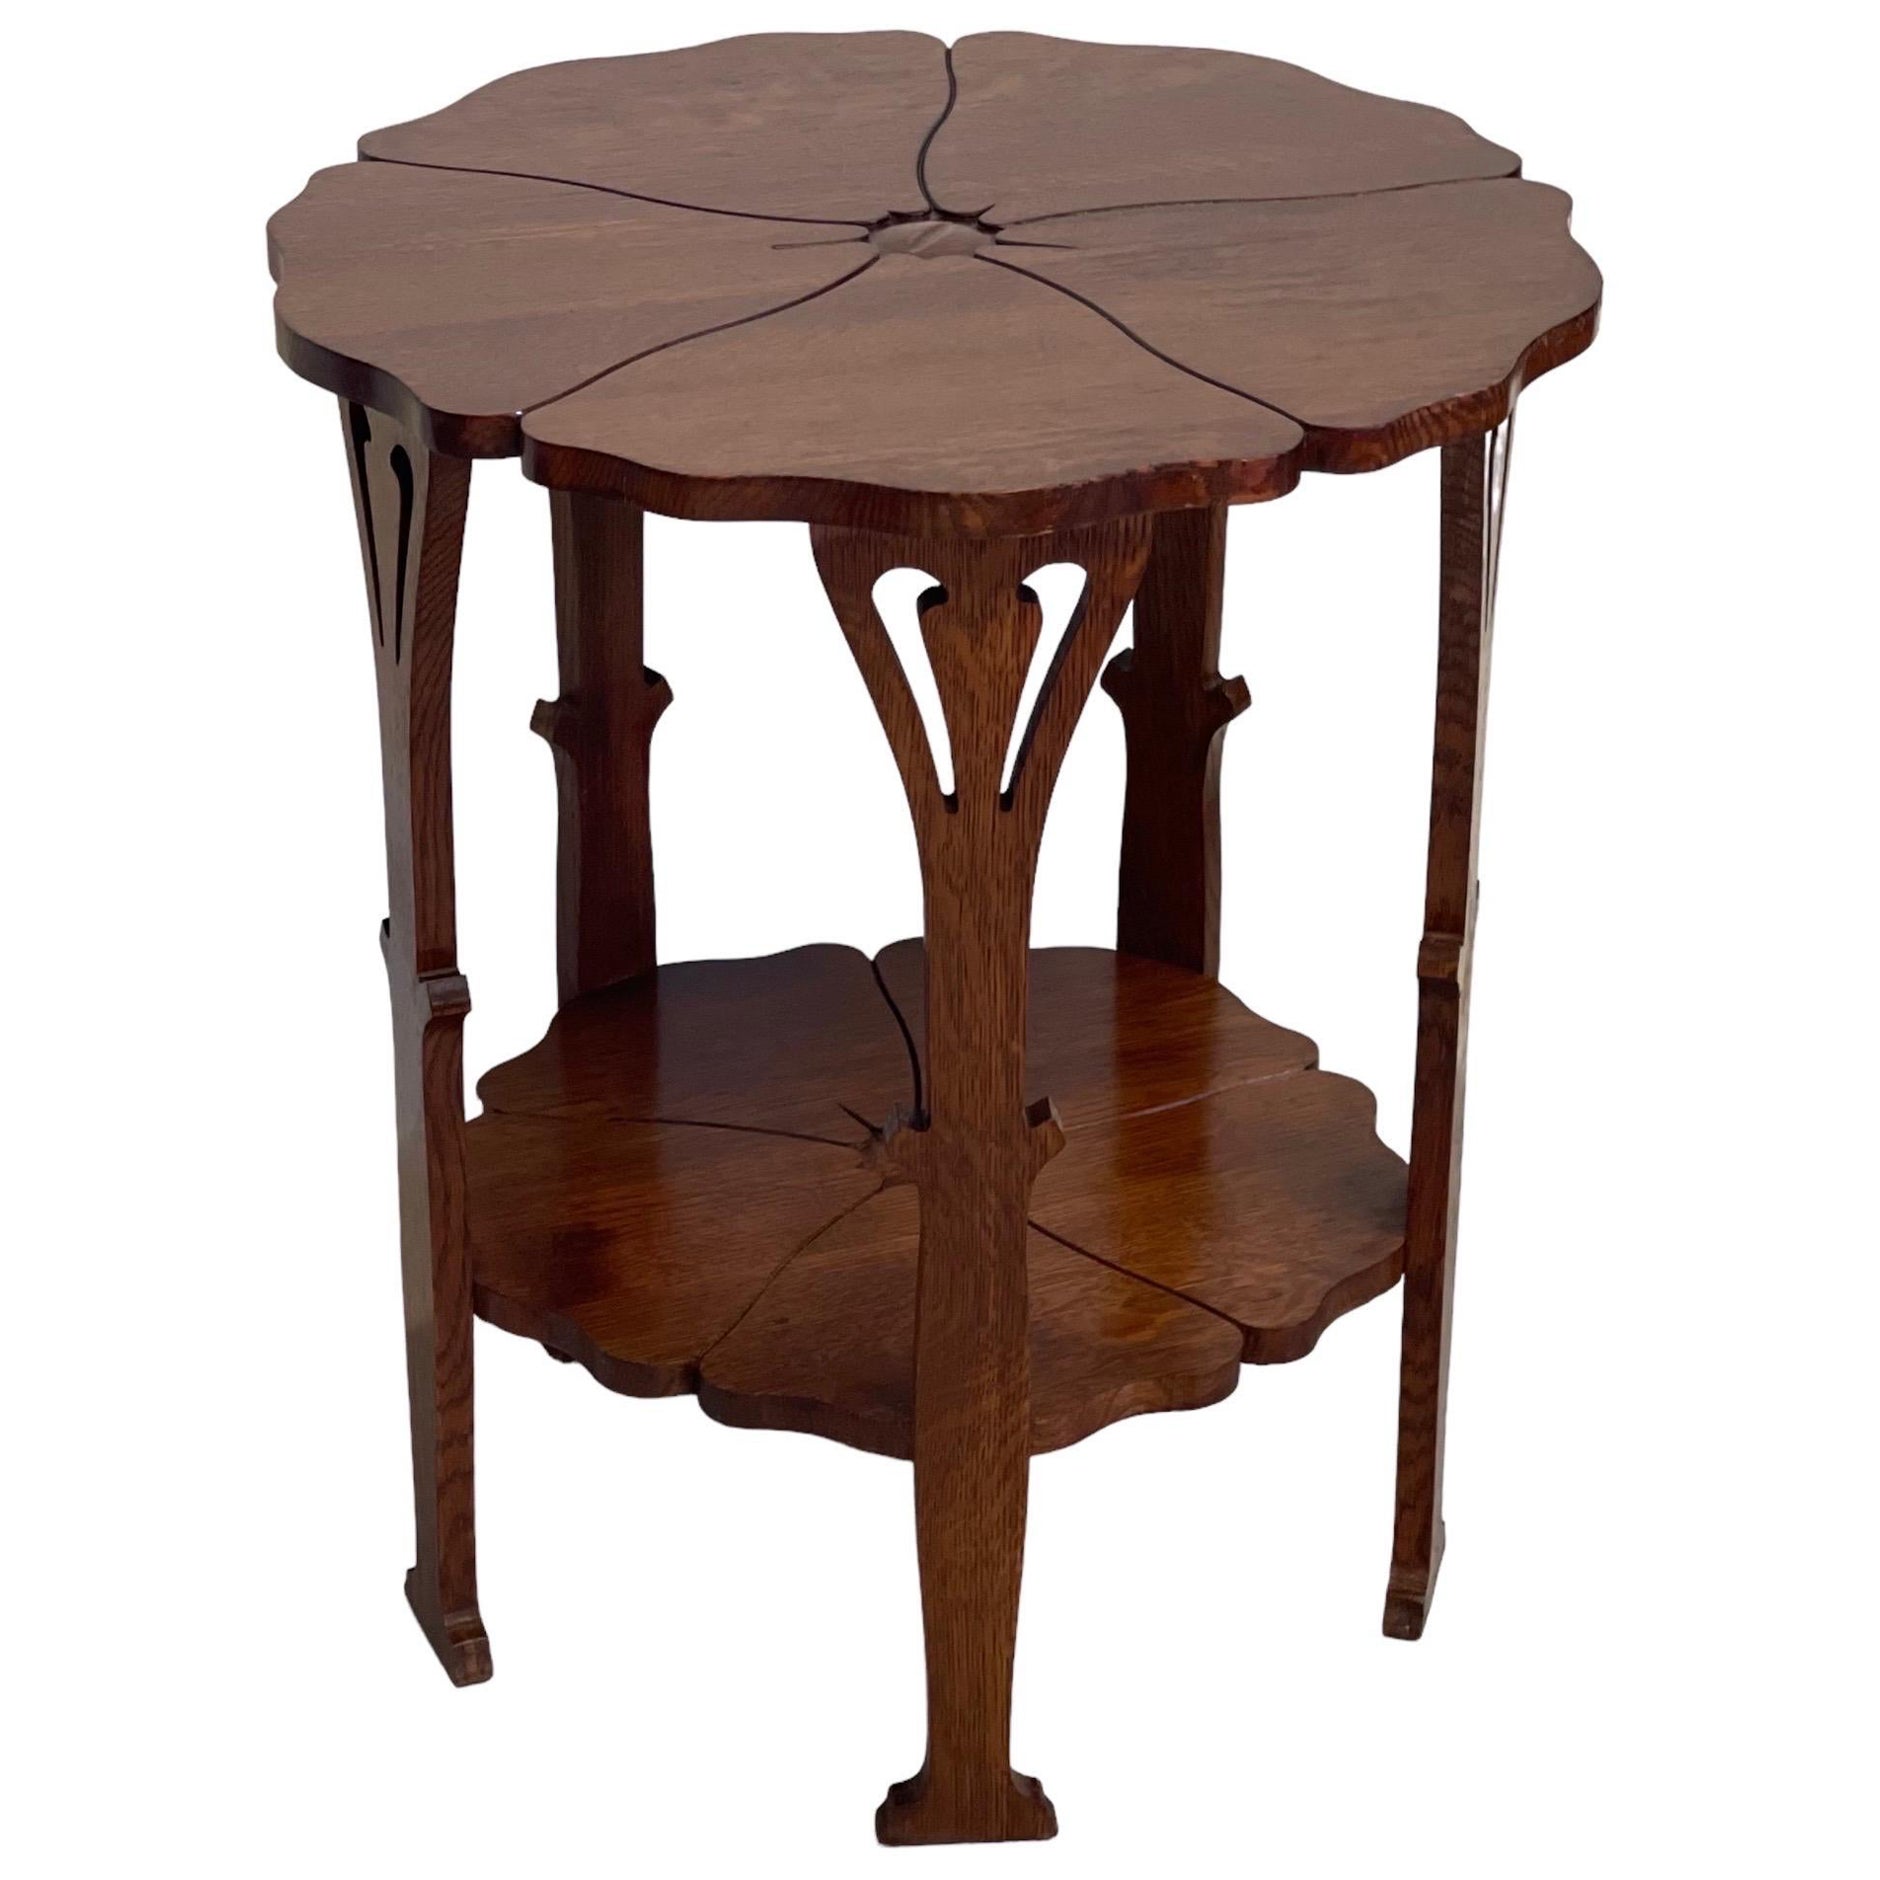 Delicately Designed Antique Gustave Stickily Poppy Table With Floral Motif